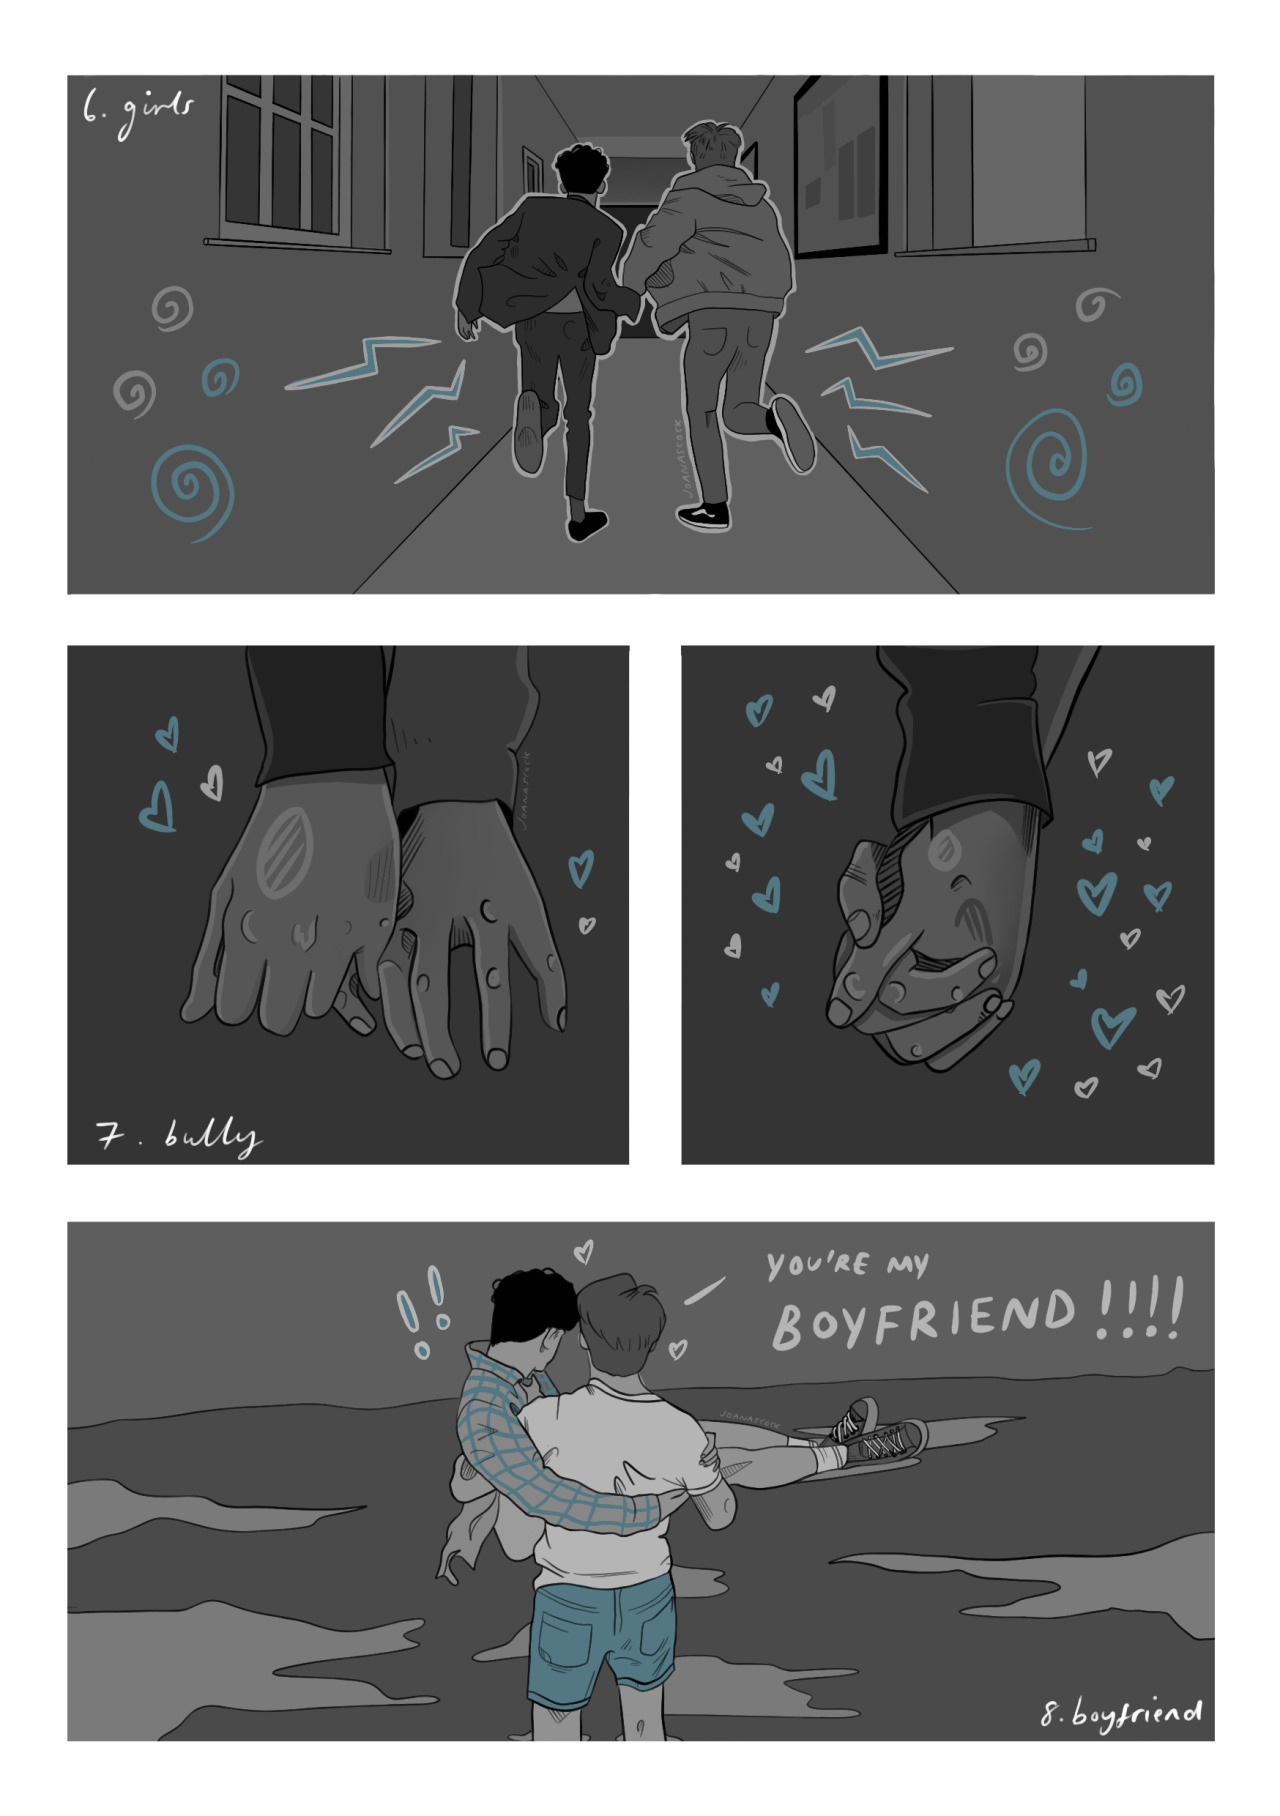 PART 3 OF MY SILLY LIL COMIC !! (part 1 | part 2) [prints here] #heartstopper#heartstopper fanart #nick and charlie  #nick x charlie #nickcharlie#lgbtq#mlm#fanart#nick nelson#charlie spring